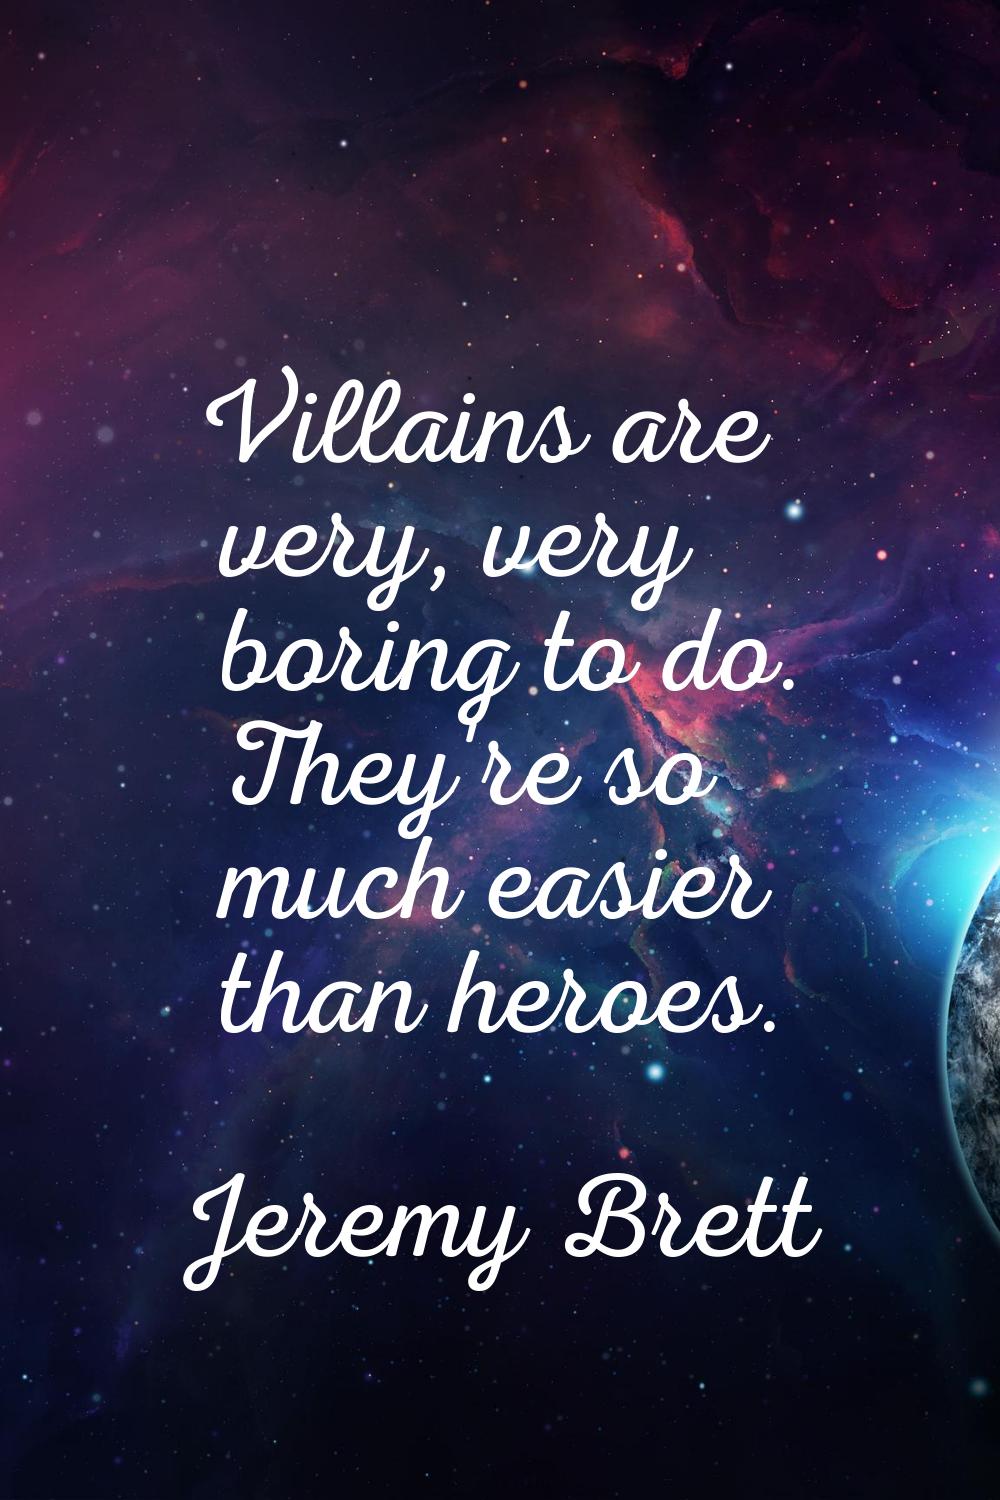 Villains are very, very boring to do. They're so much easier than heroes.